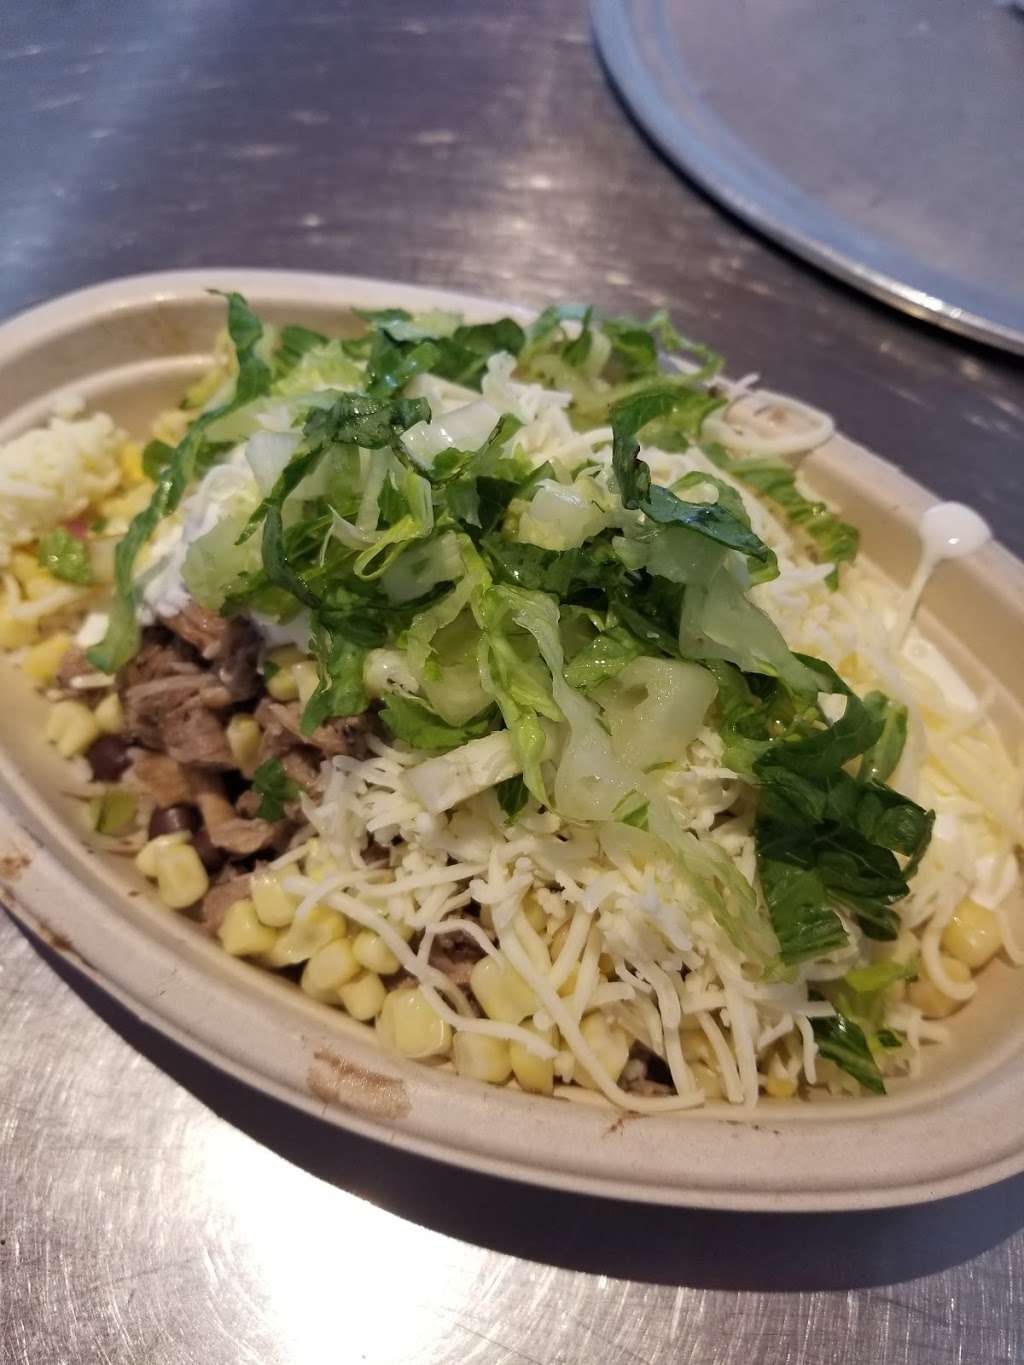 Chipotle Mexican Grill | 18003 Garland Groh Blvd, Hagerstown, MD 21740 | Phone: (240) 420-8010